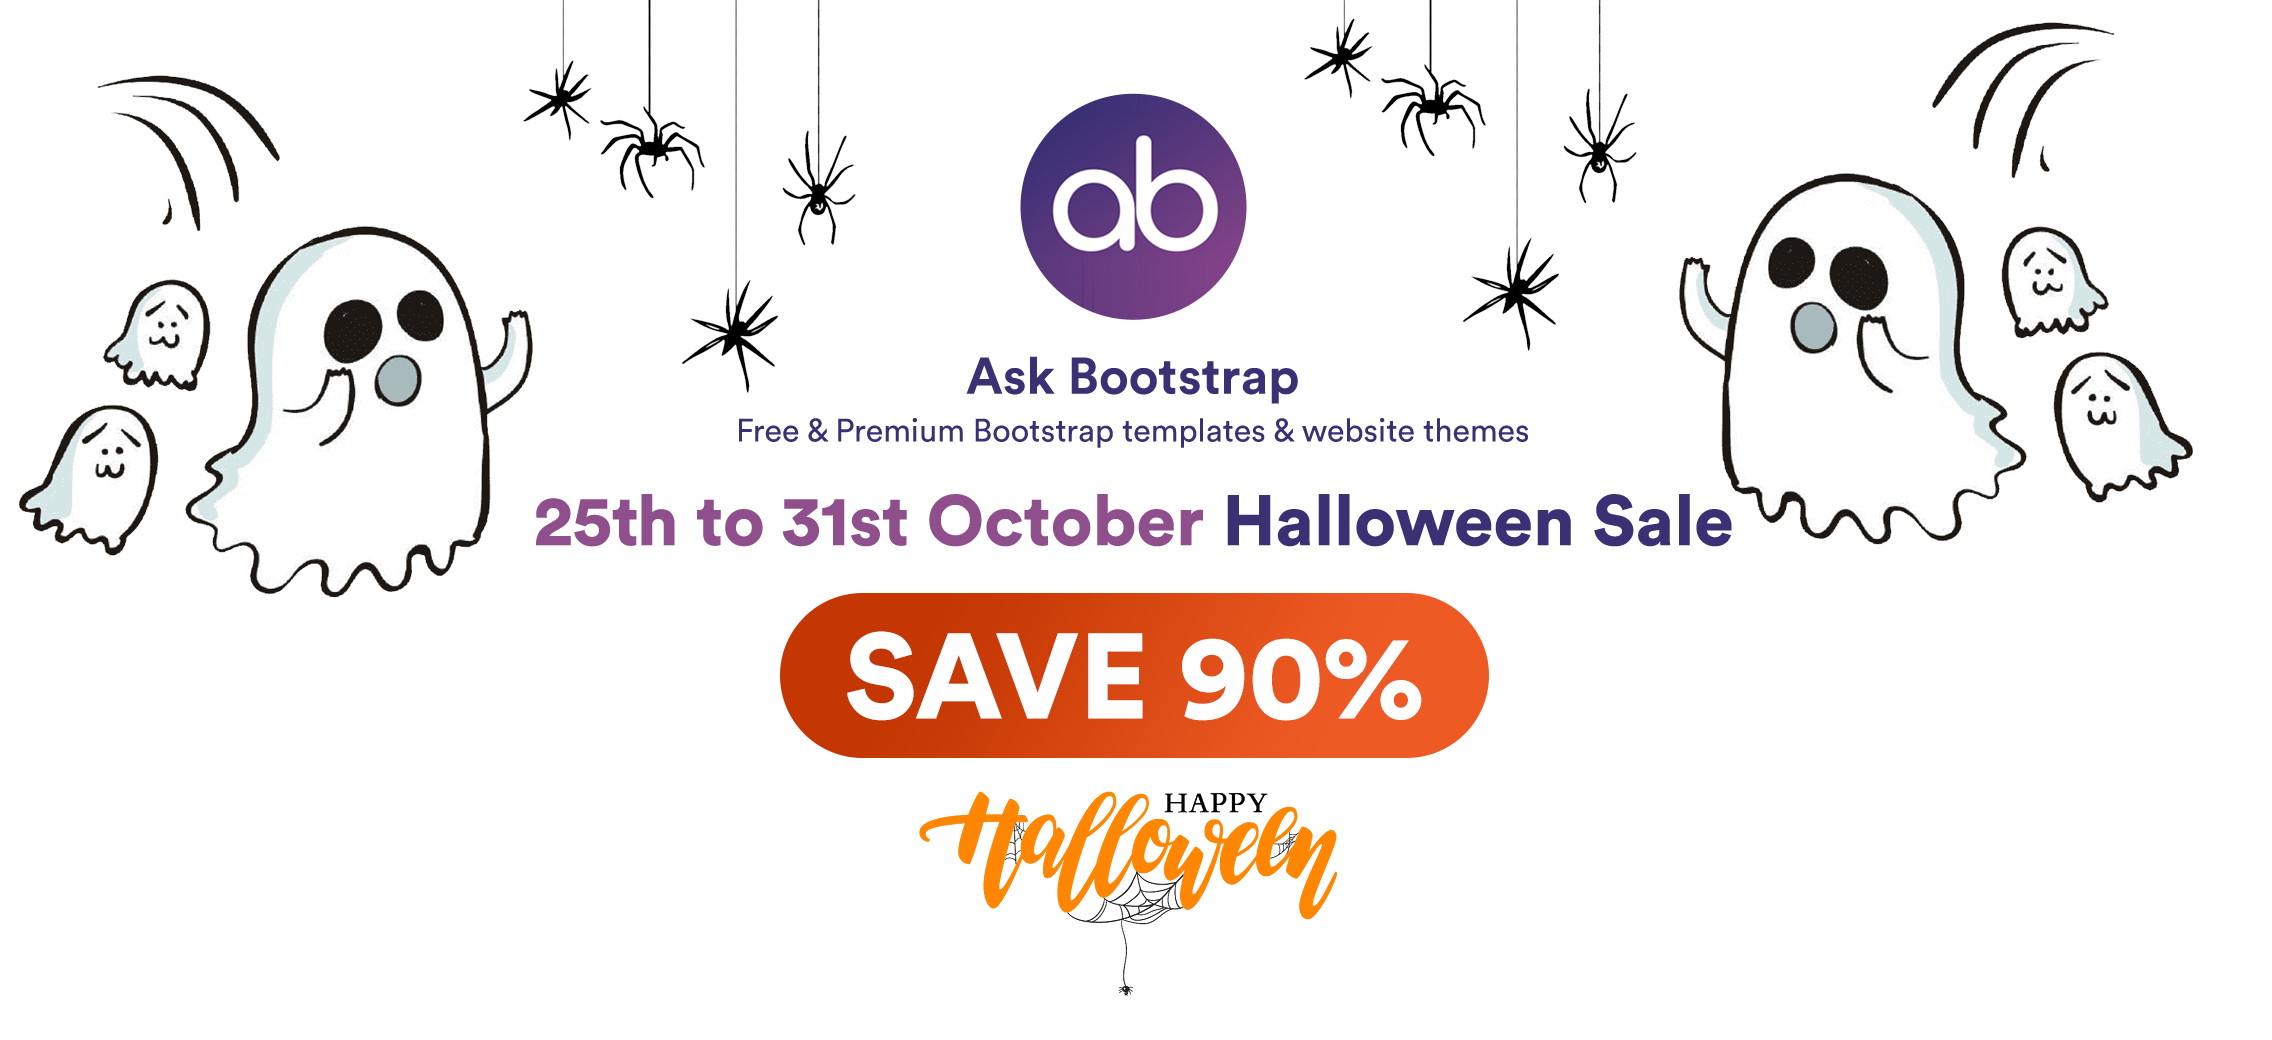 25th to 31st October Halloween Sale